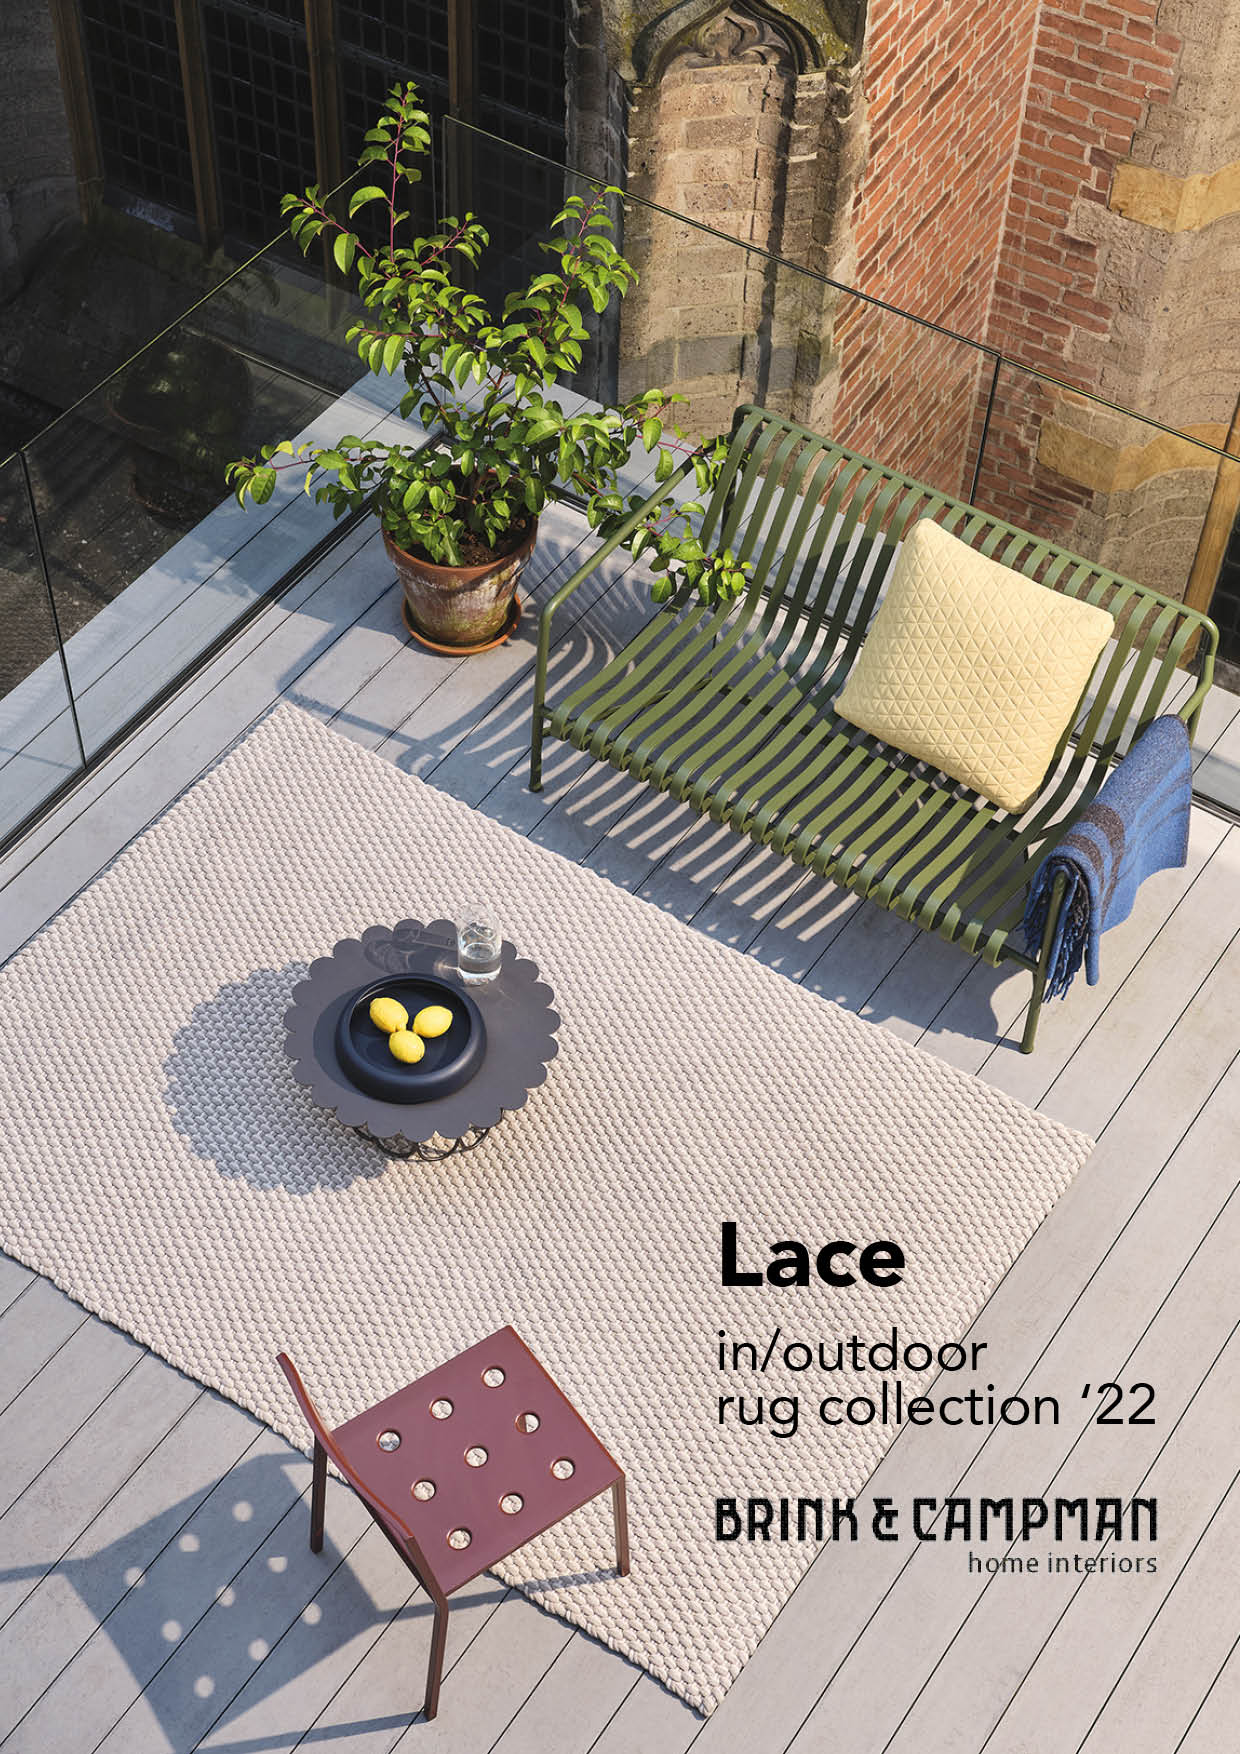 Lace in/outdoor collection